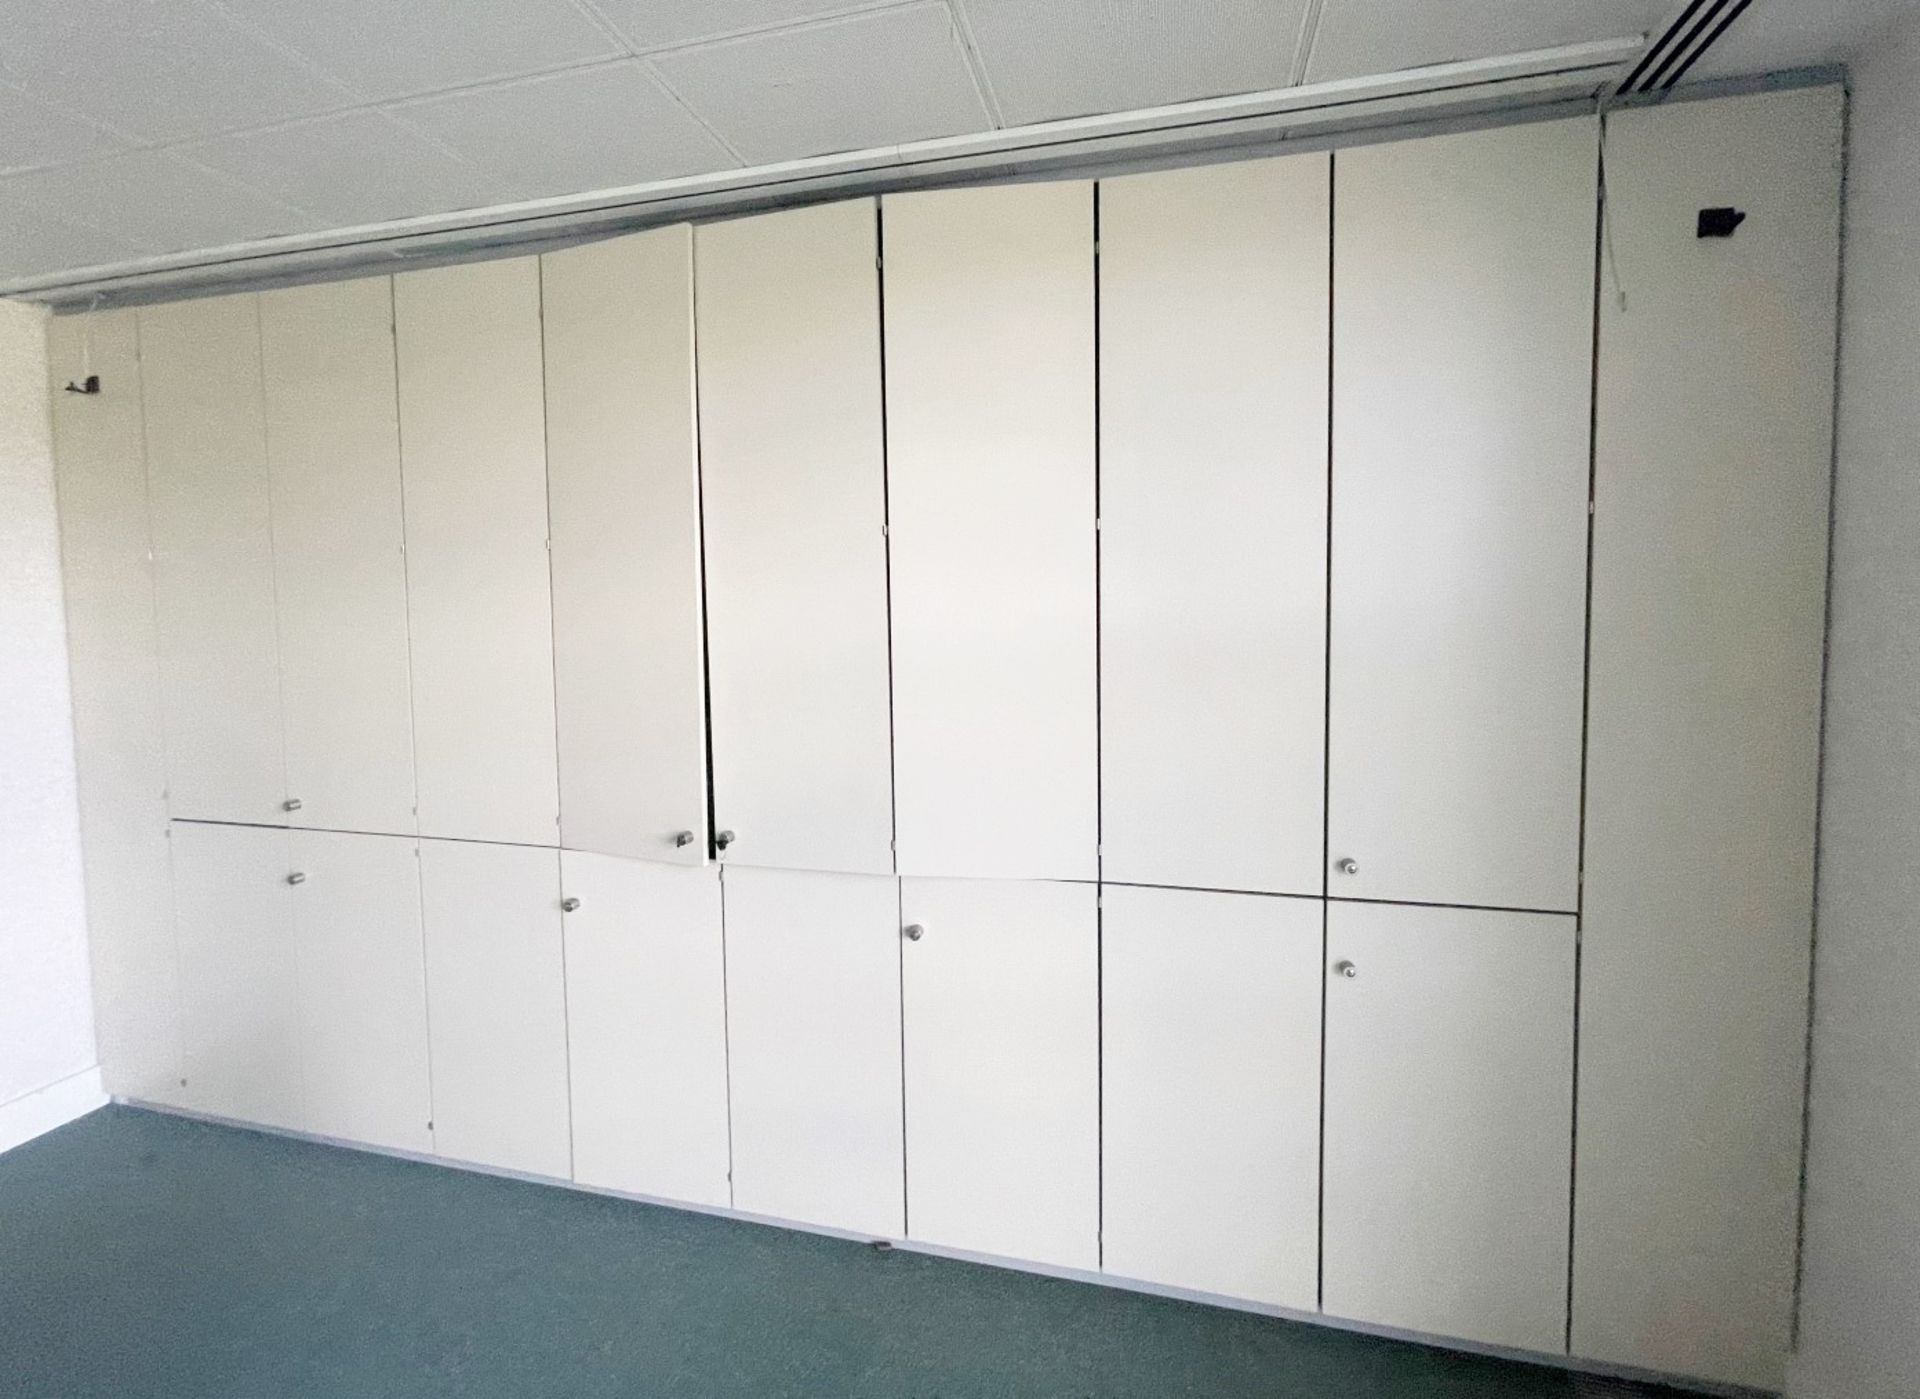 4.8 Metre Wide Bank Of Wall Storage Units - Ref: ED167C - To Be Removed From An Executive Office